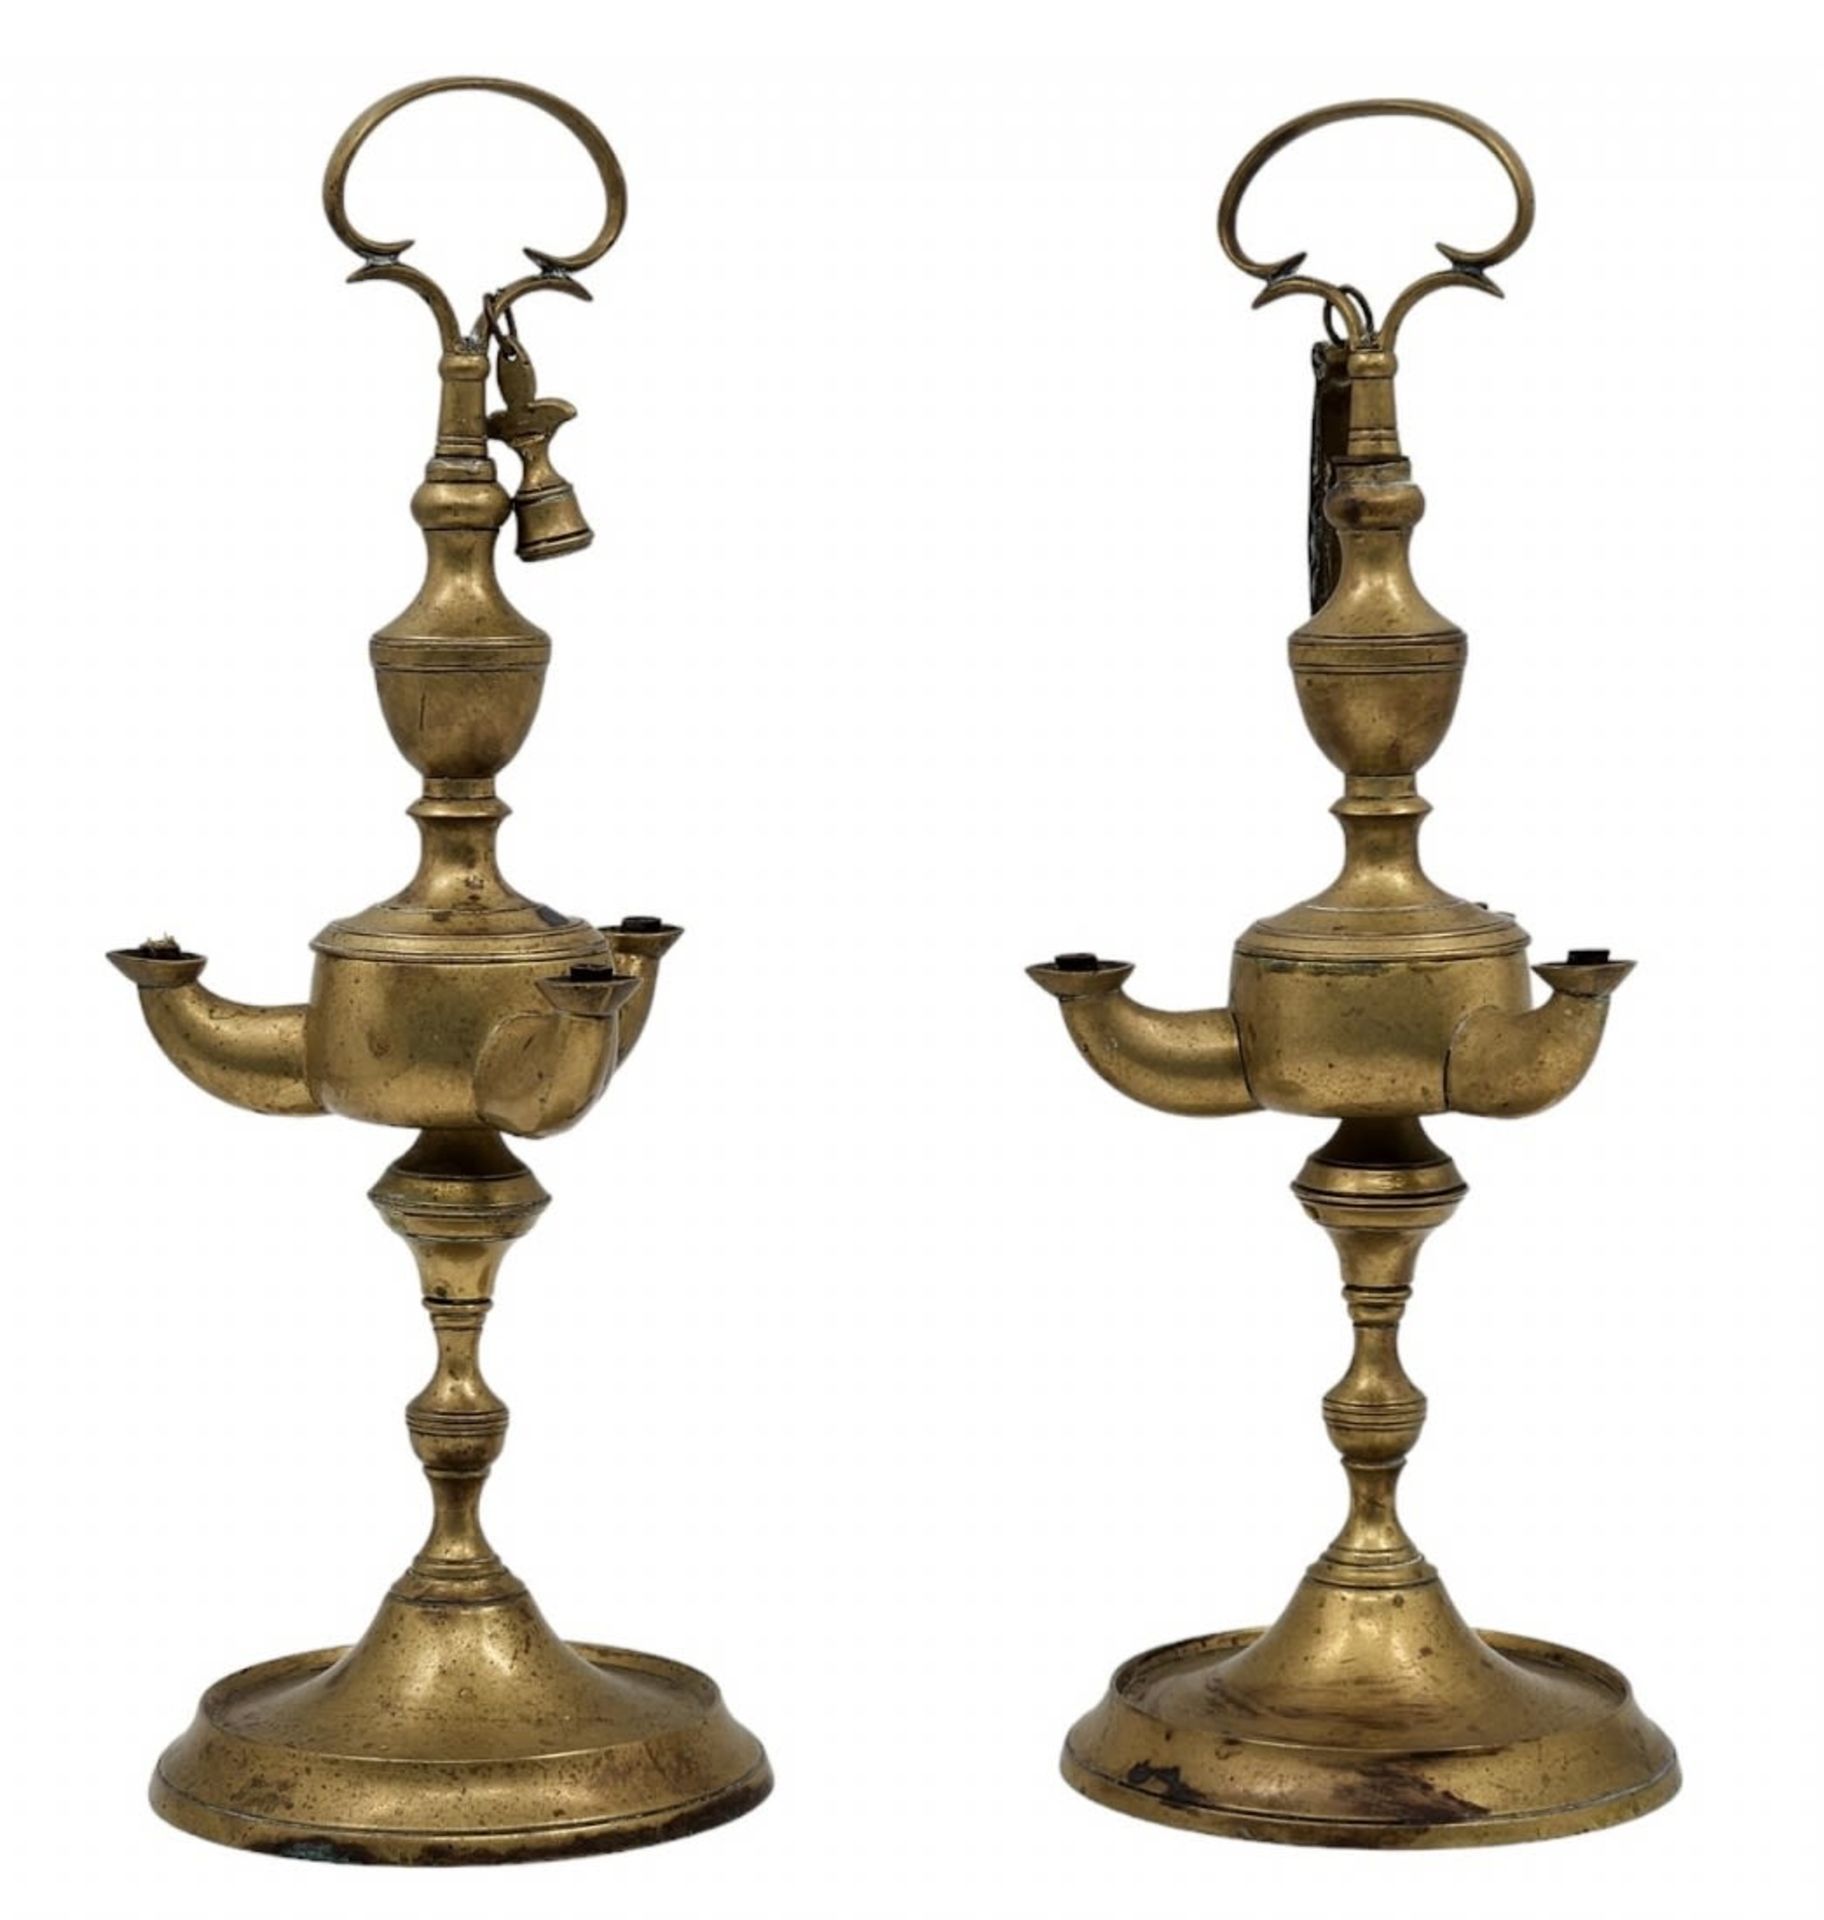 A pair of antique Italian 'Lucerna' type oil lamps, made of brass, late 19th century, Width: 12.5 - Image 3 of 3